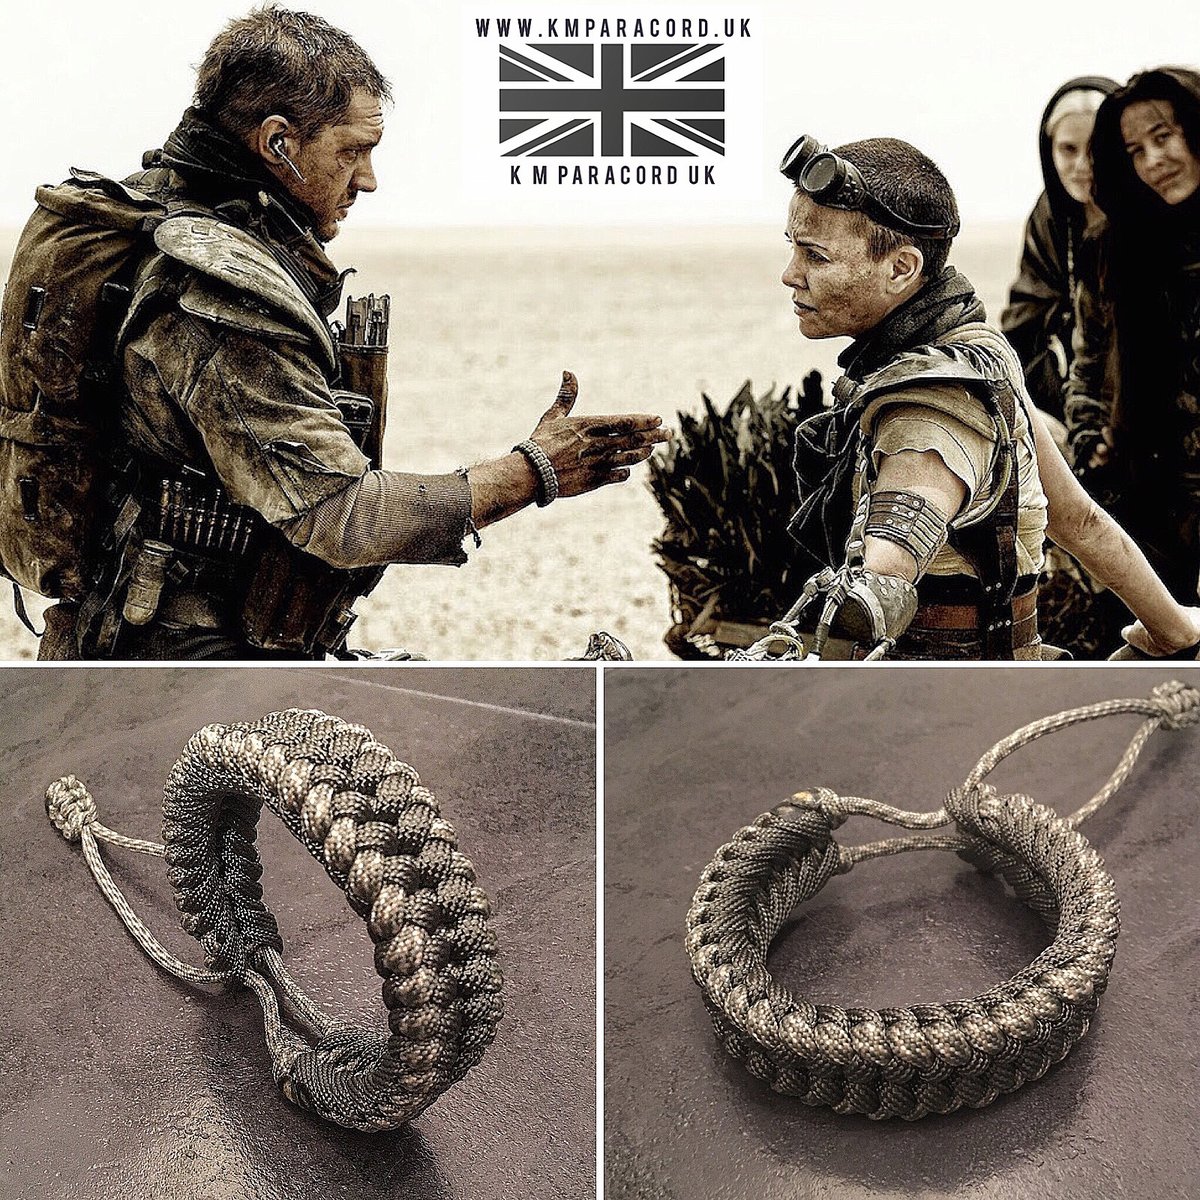 KMP 'MAD MAX' style Sanctified Wristband